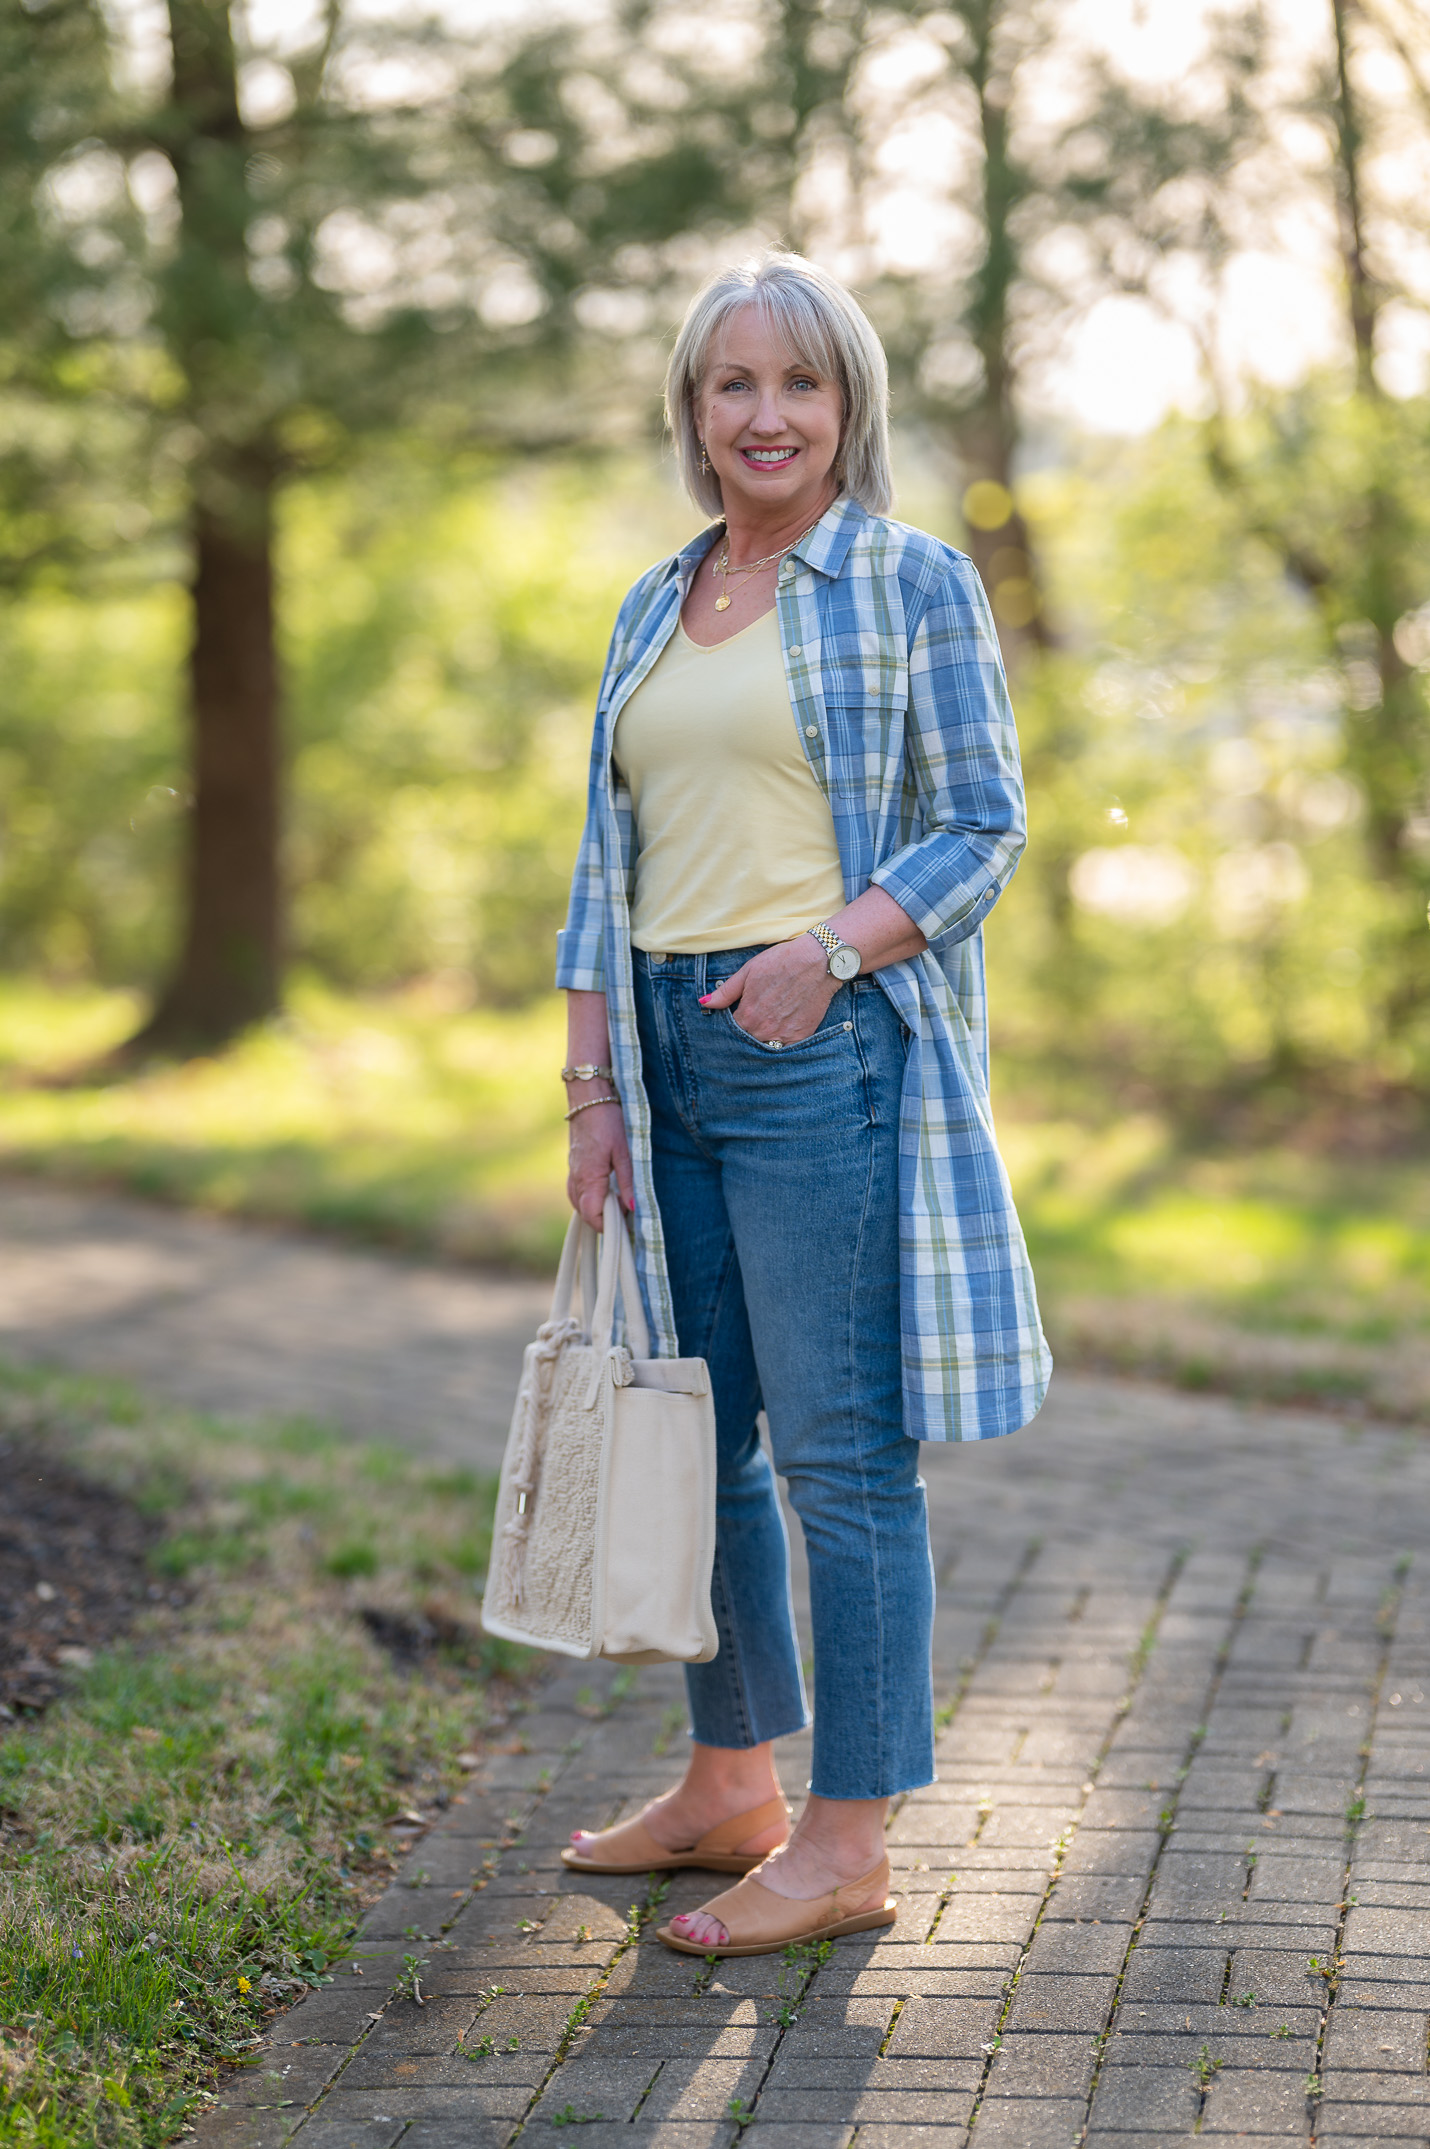 Wearing a Shirtdress as a Completer Piece Over Jeans and a Tank Top